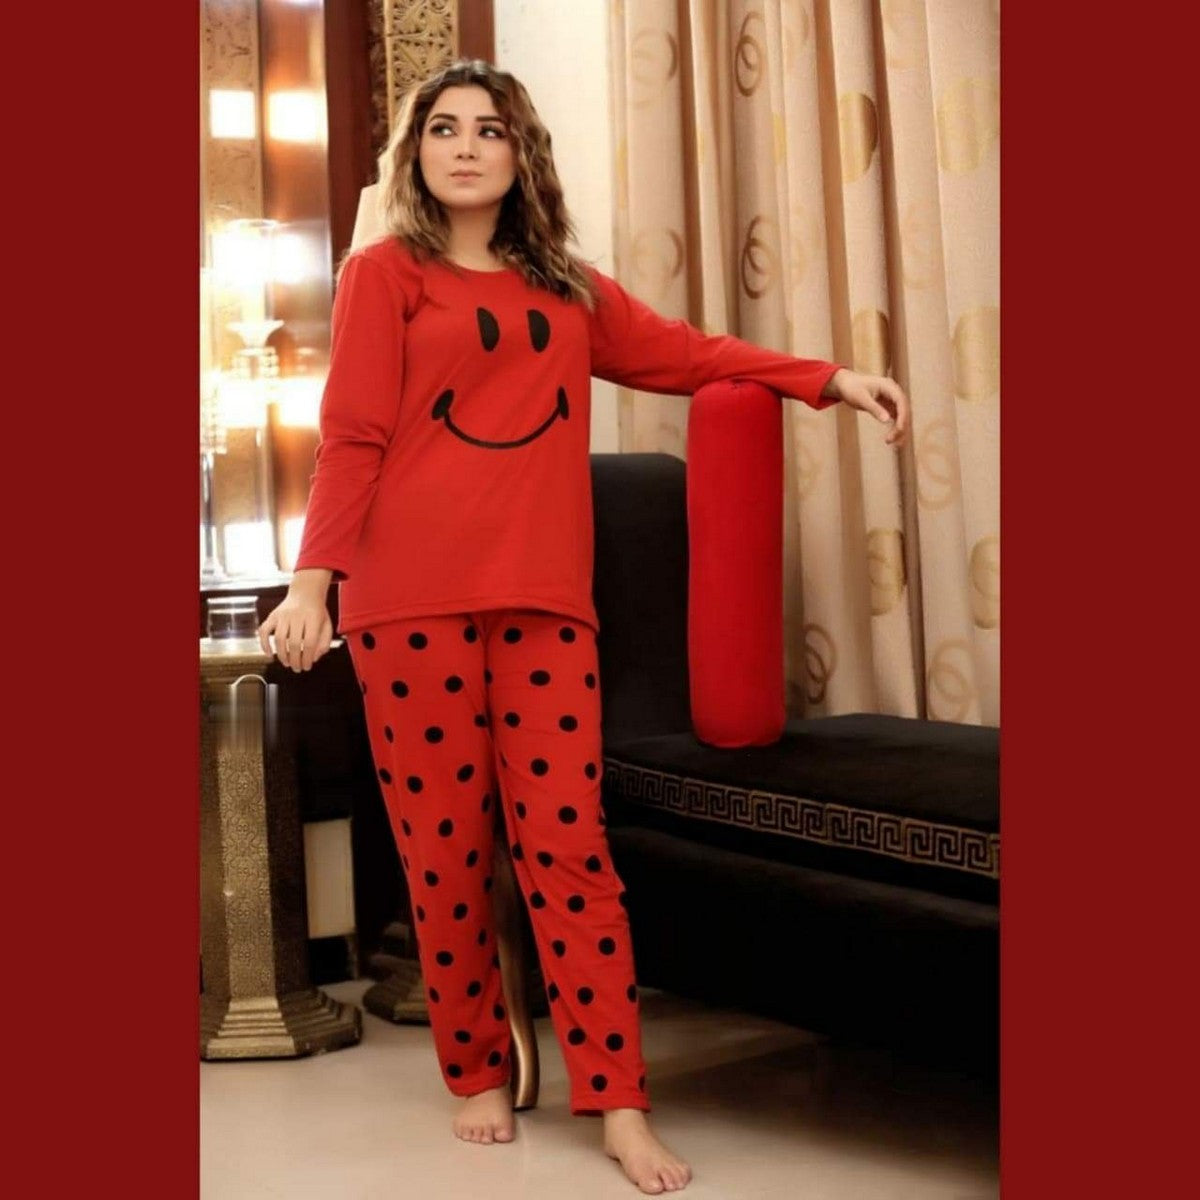 Red Colour Smile Printed Design Stylish Full Sleeves Round Neck T-Shirt and Pajama Night Suit For Ladies Women and Girls